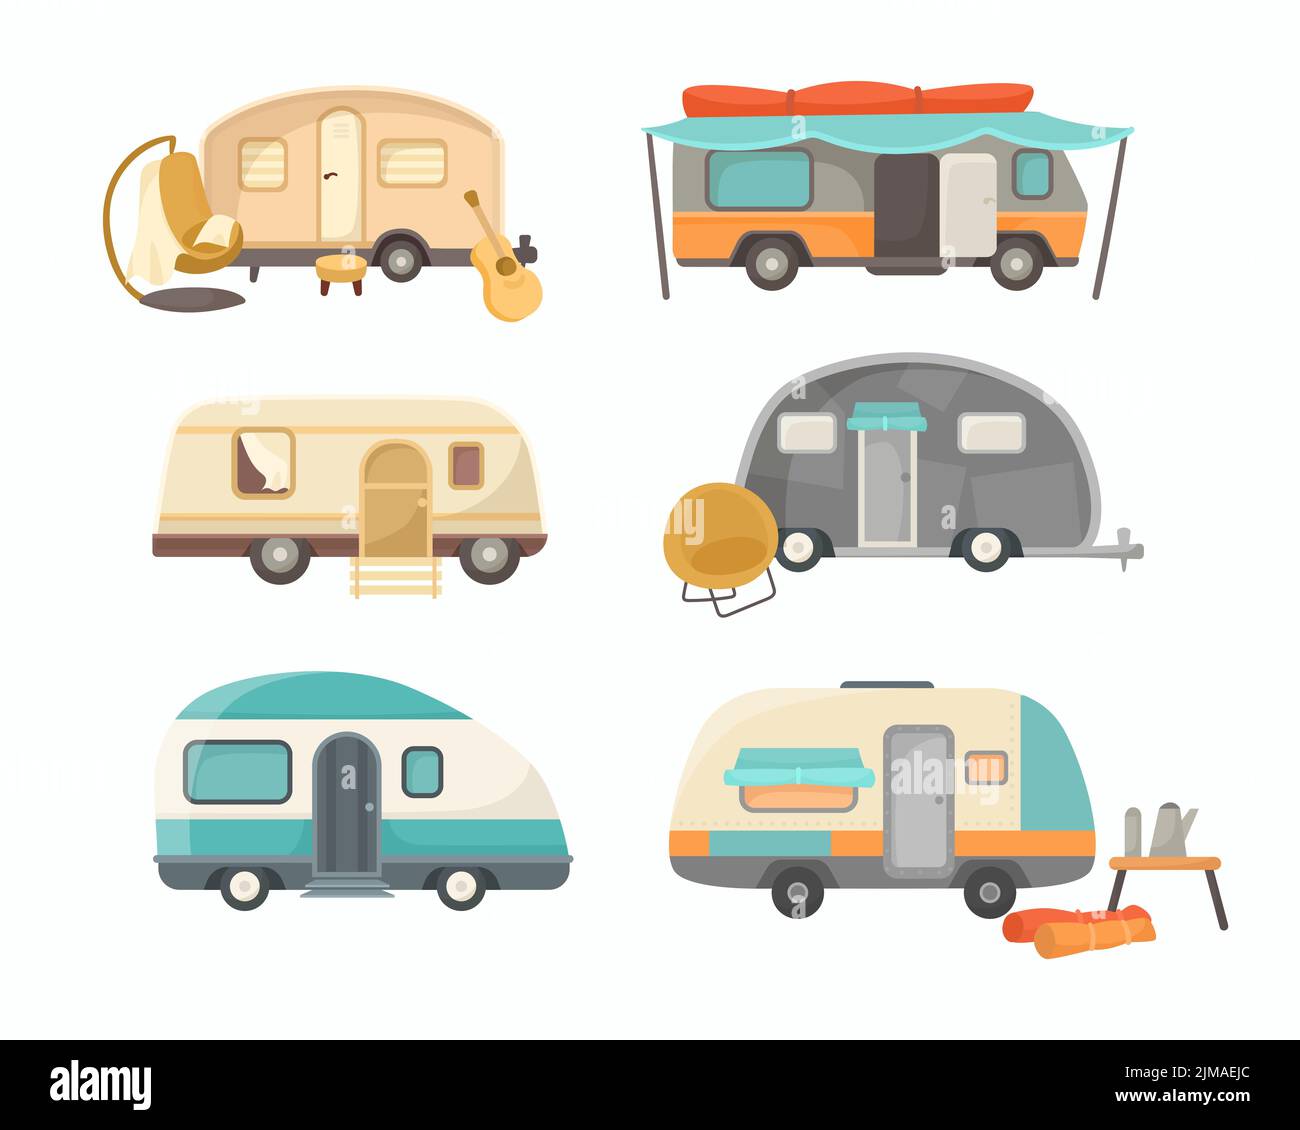 Various RV or house trailers cartoon illustration set. Vintage vans, mobile home or camping truck for travel, adventure, journey in summer family vaca Stock Vector